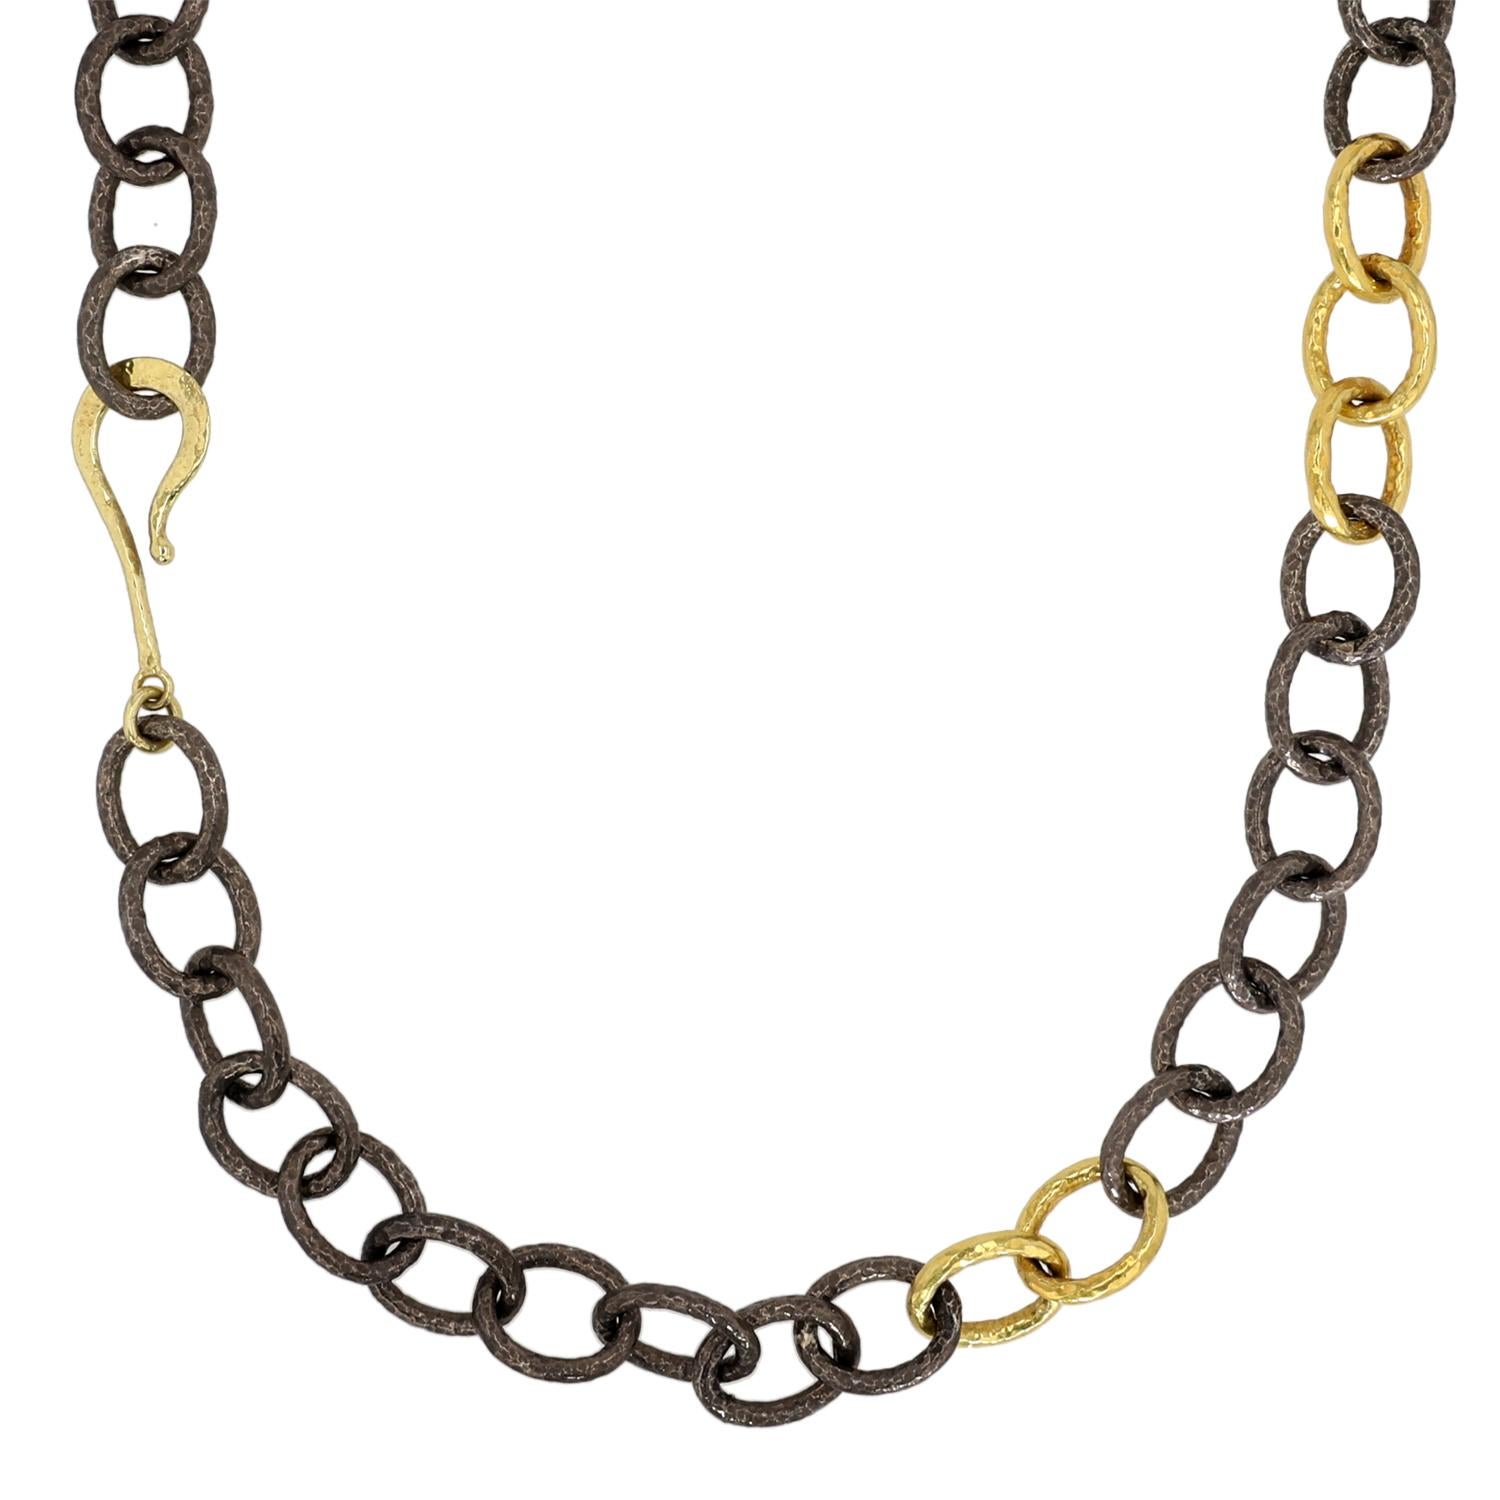 This elegant necklace by Jorge Adeler features a striking combination of 18k yellow gold and oxidized silver, crafted into a series of linked chains. The design is finished with a fish hook clasp, adding a classic yet functional detail. The contrast